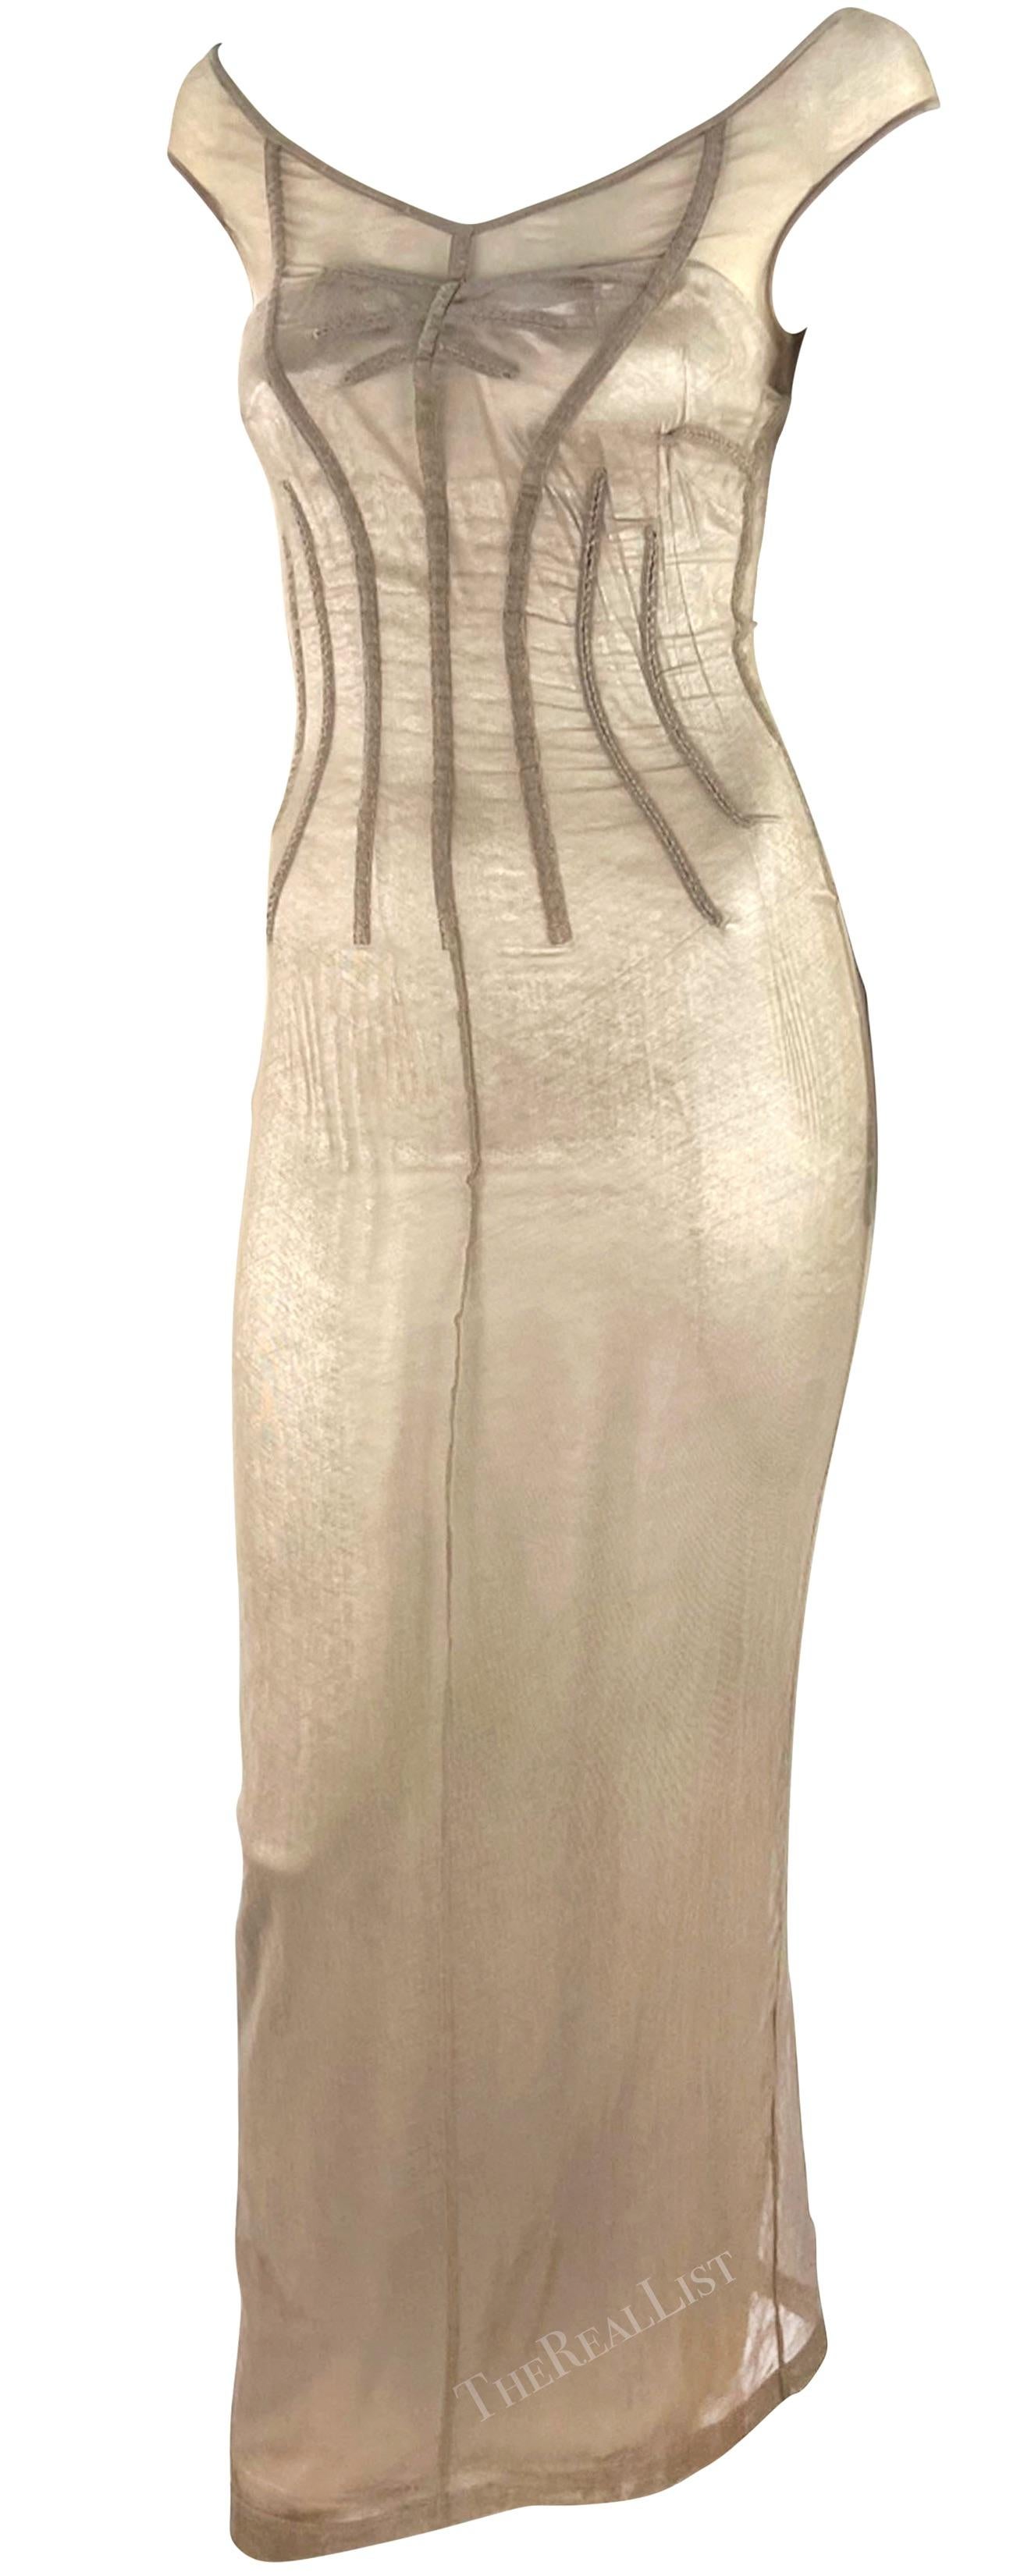 Women's S/S 1998 Dolce & Gabbana 'Stromboli' Taupe Mesh Silver Bodycon Boned Gown  For Sale